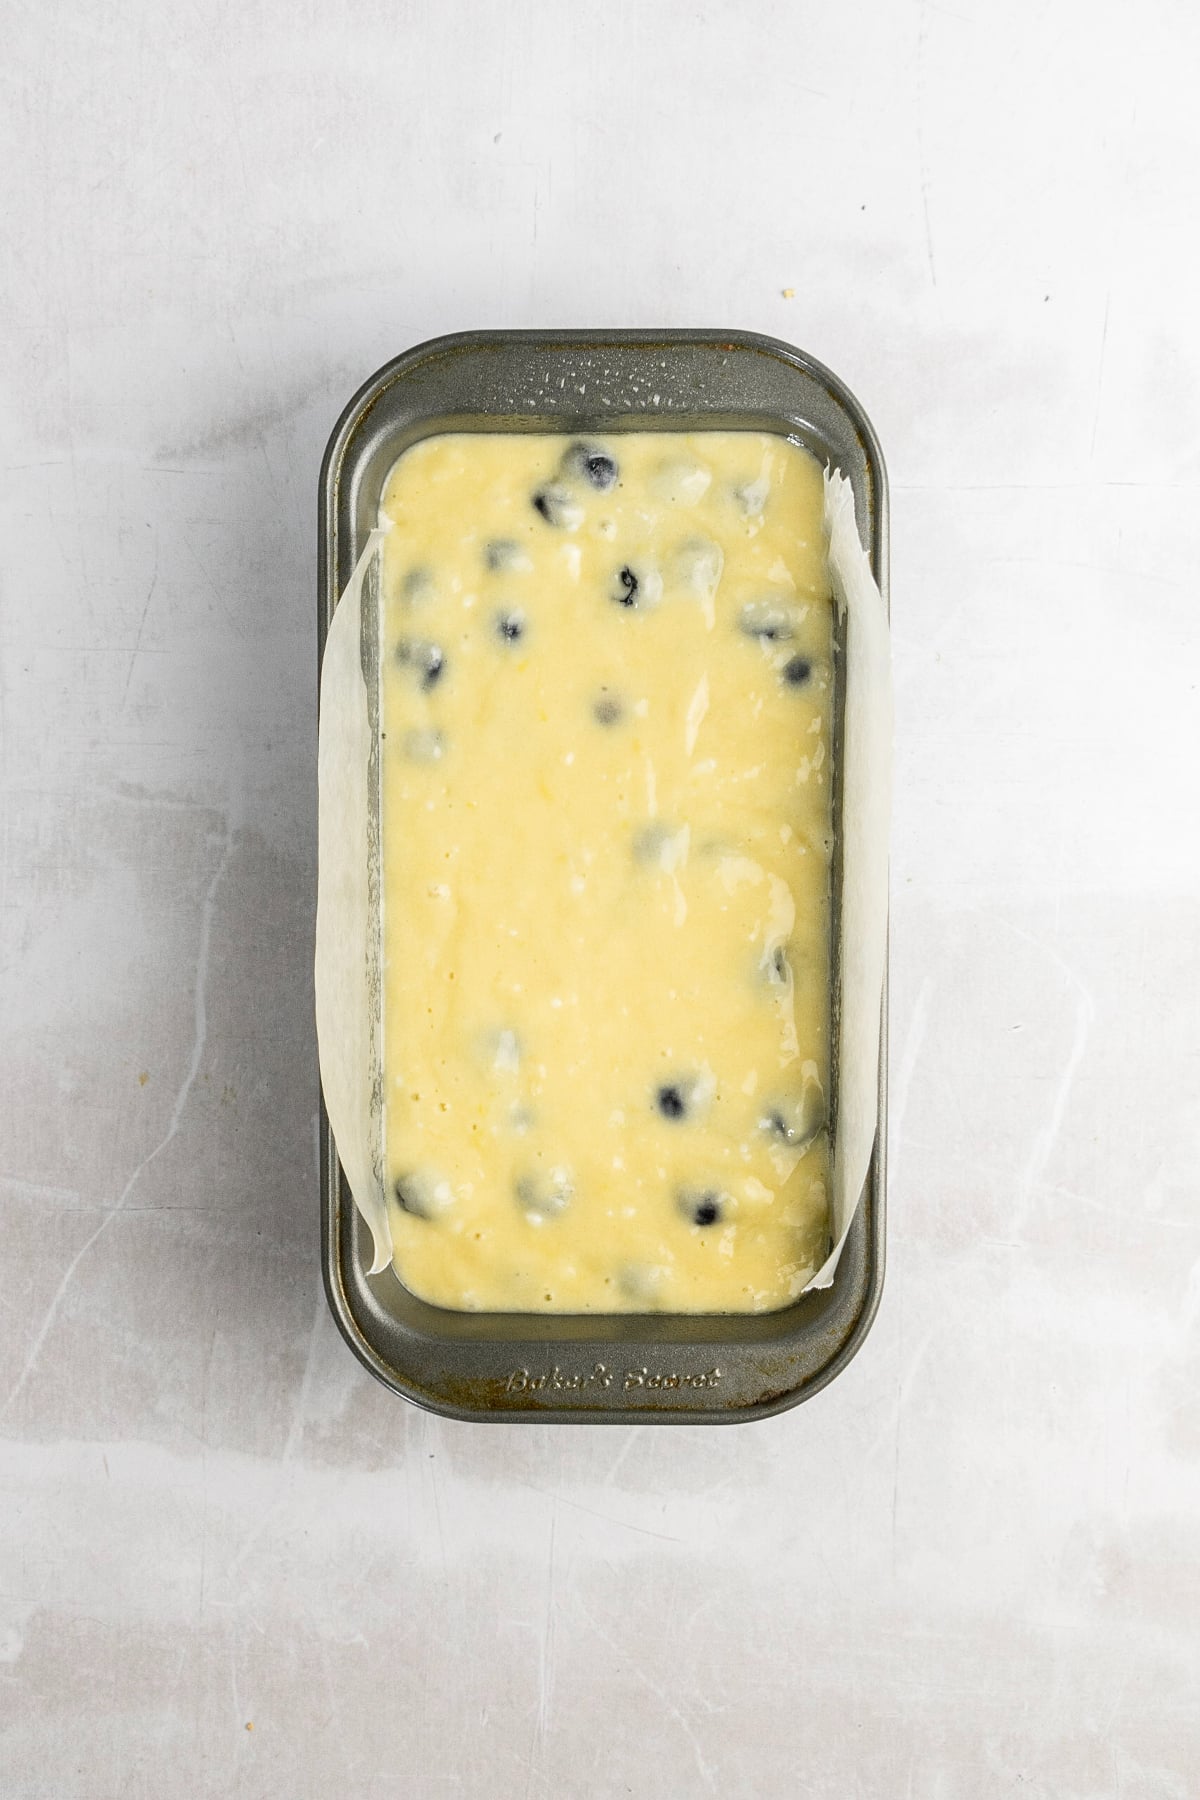 A bread pan filled with lemon blueberry batter.